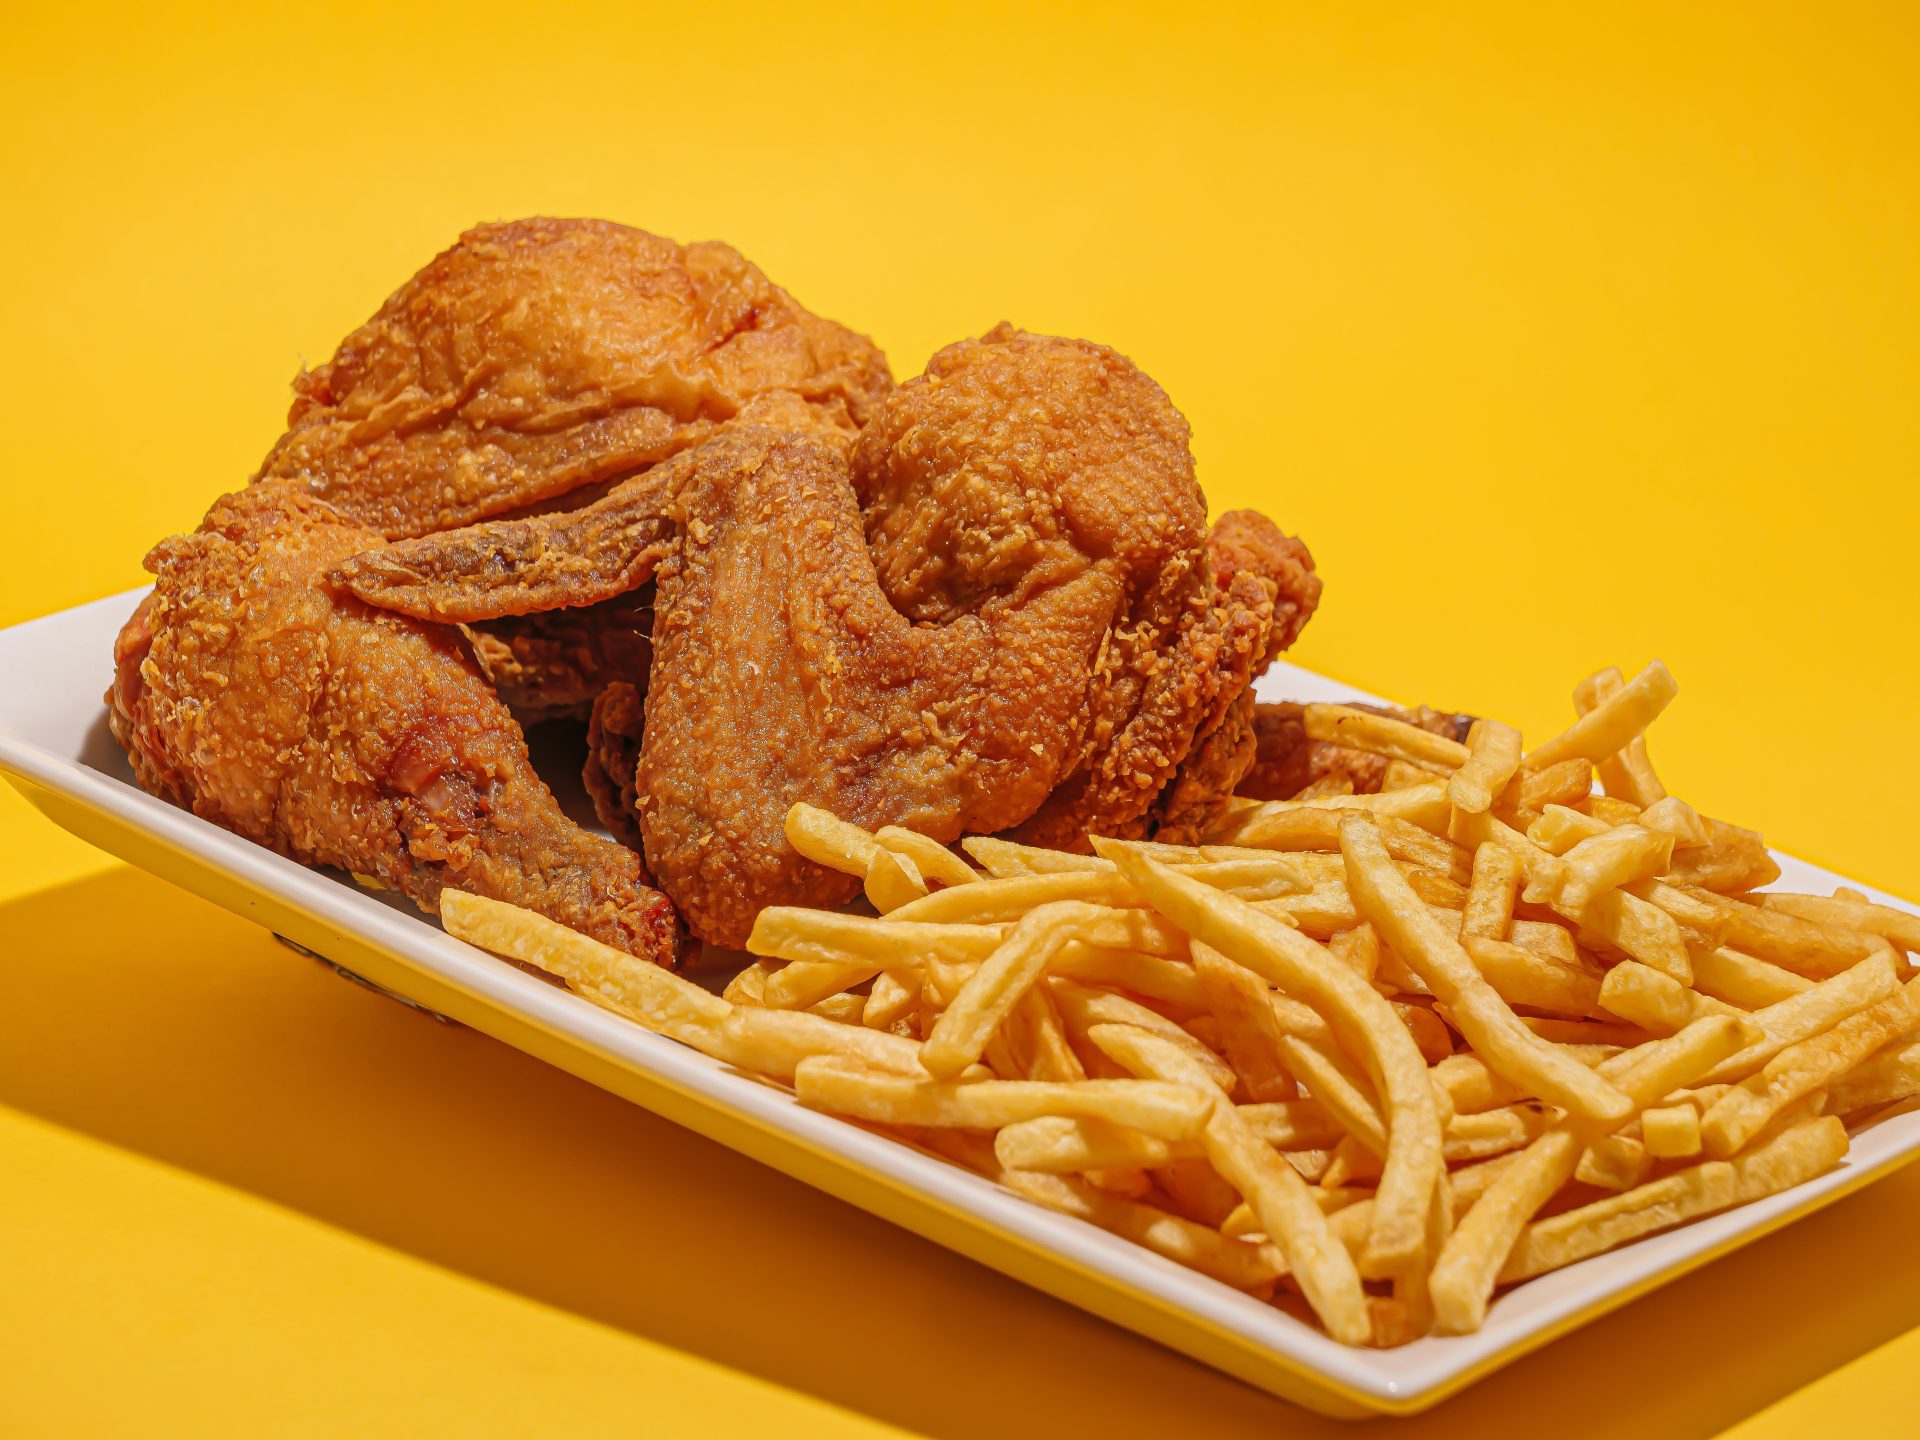 Friend chicken and French fries in yellow background